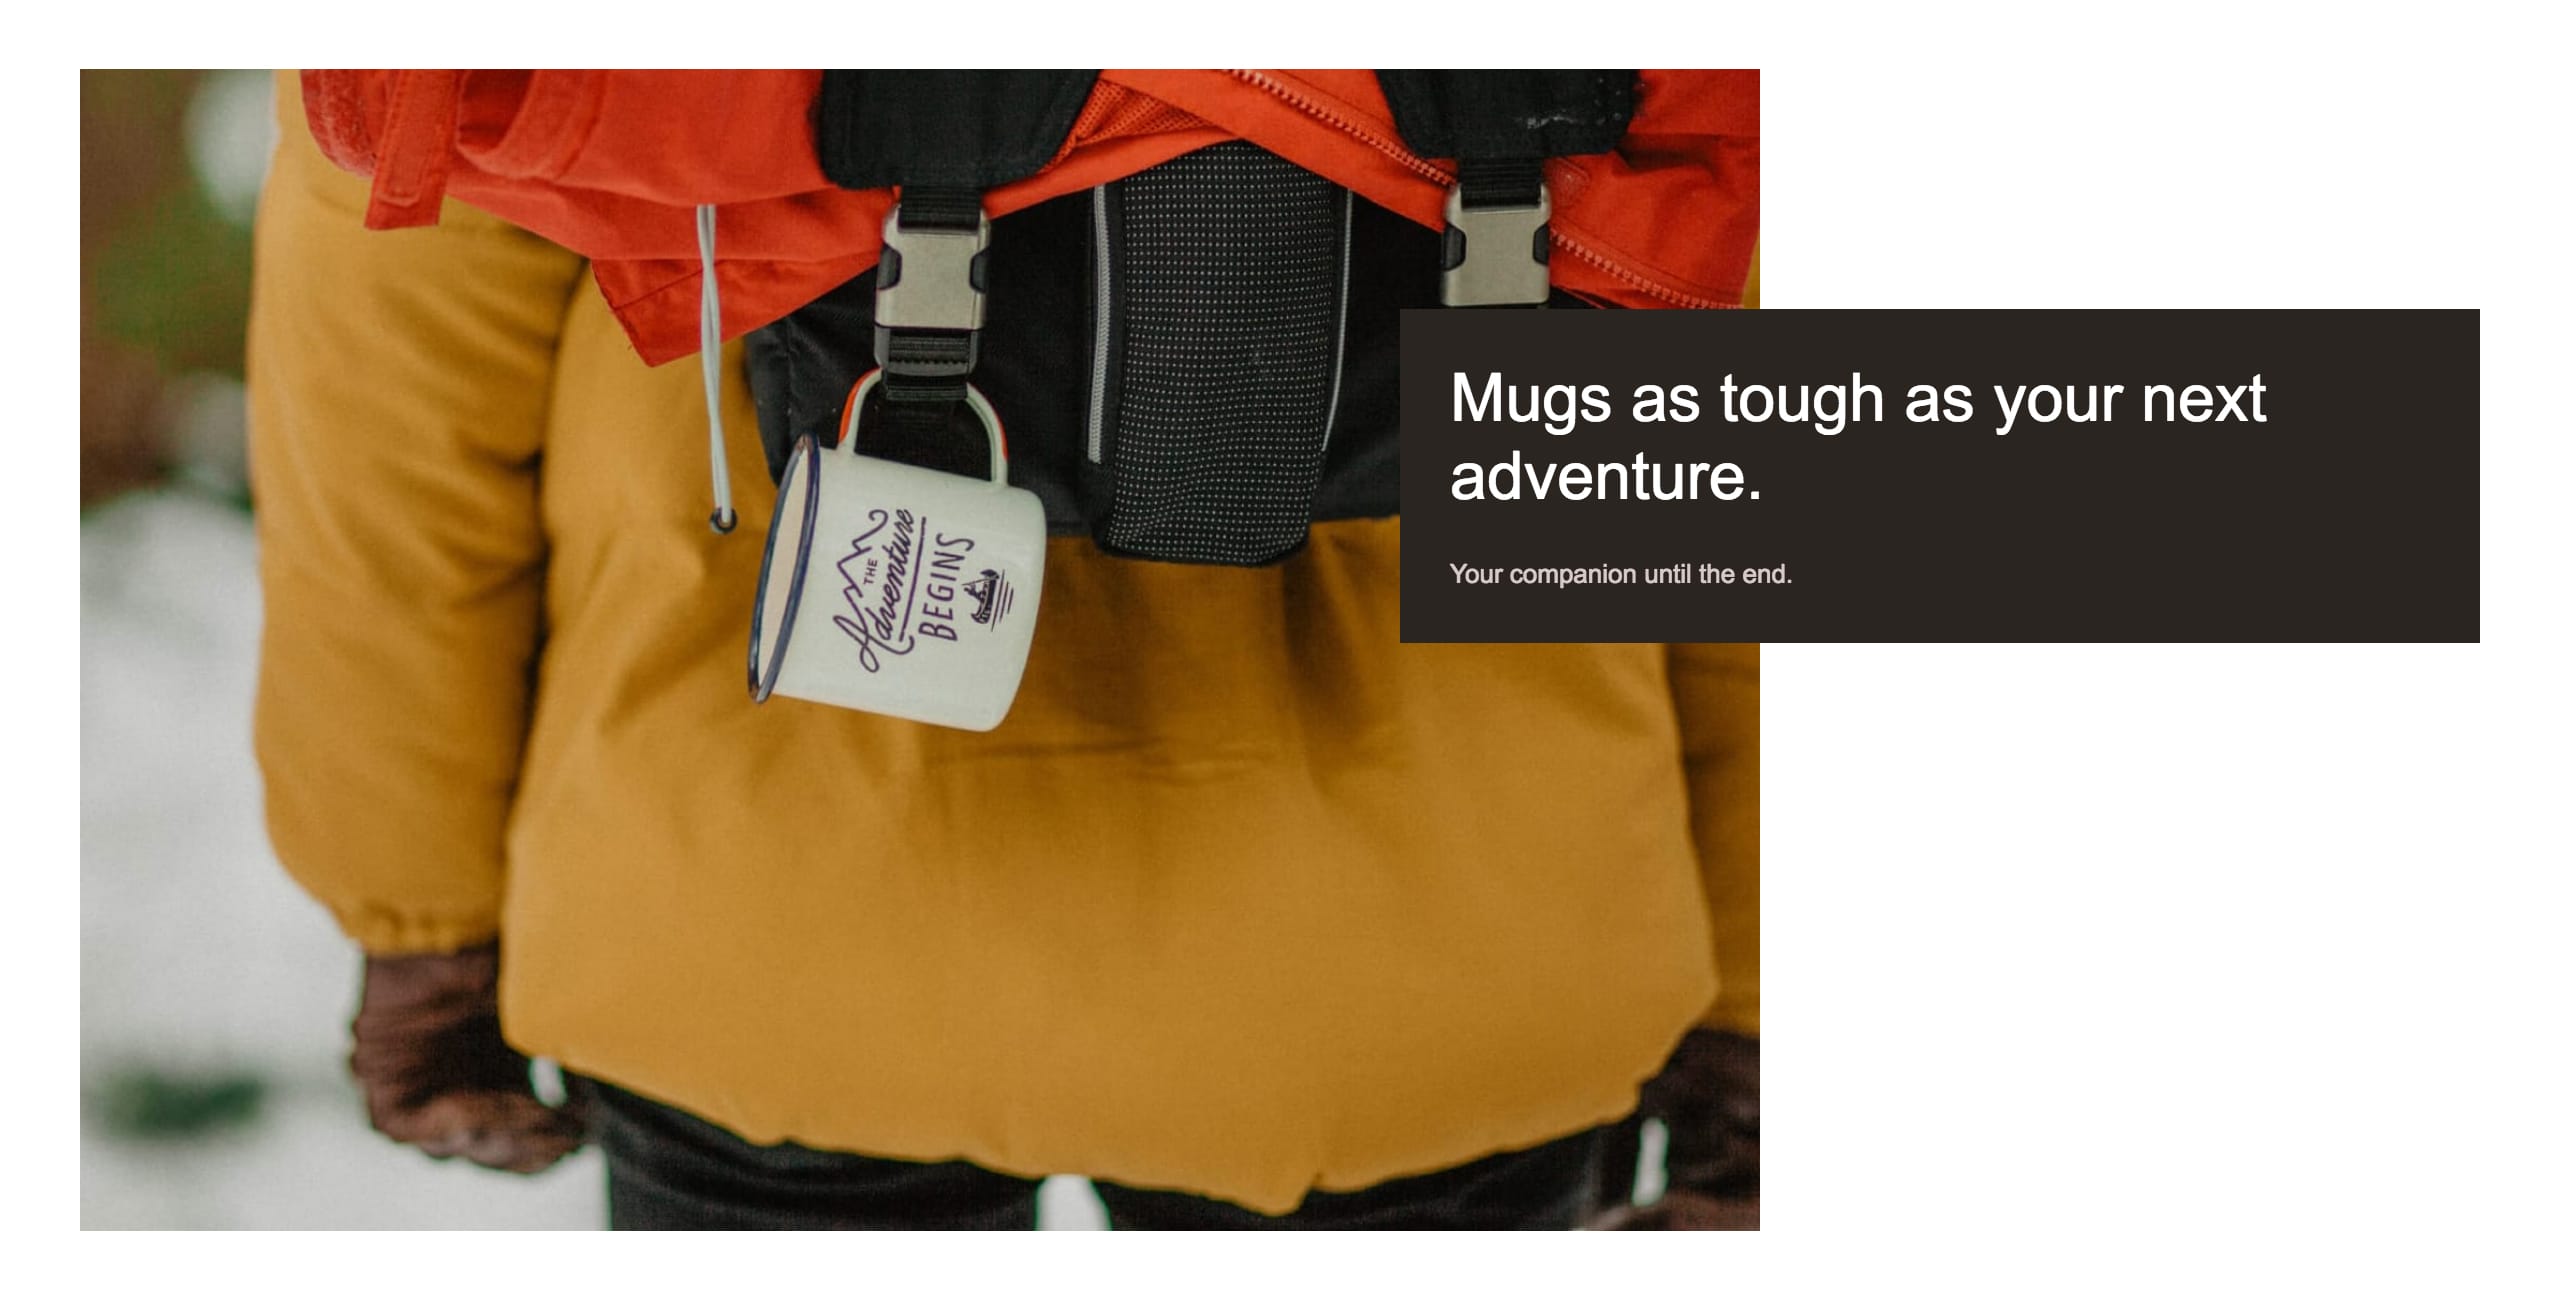 It identifies they are tough and are in need of hardy gear to last throughout their adventures